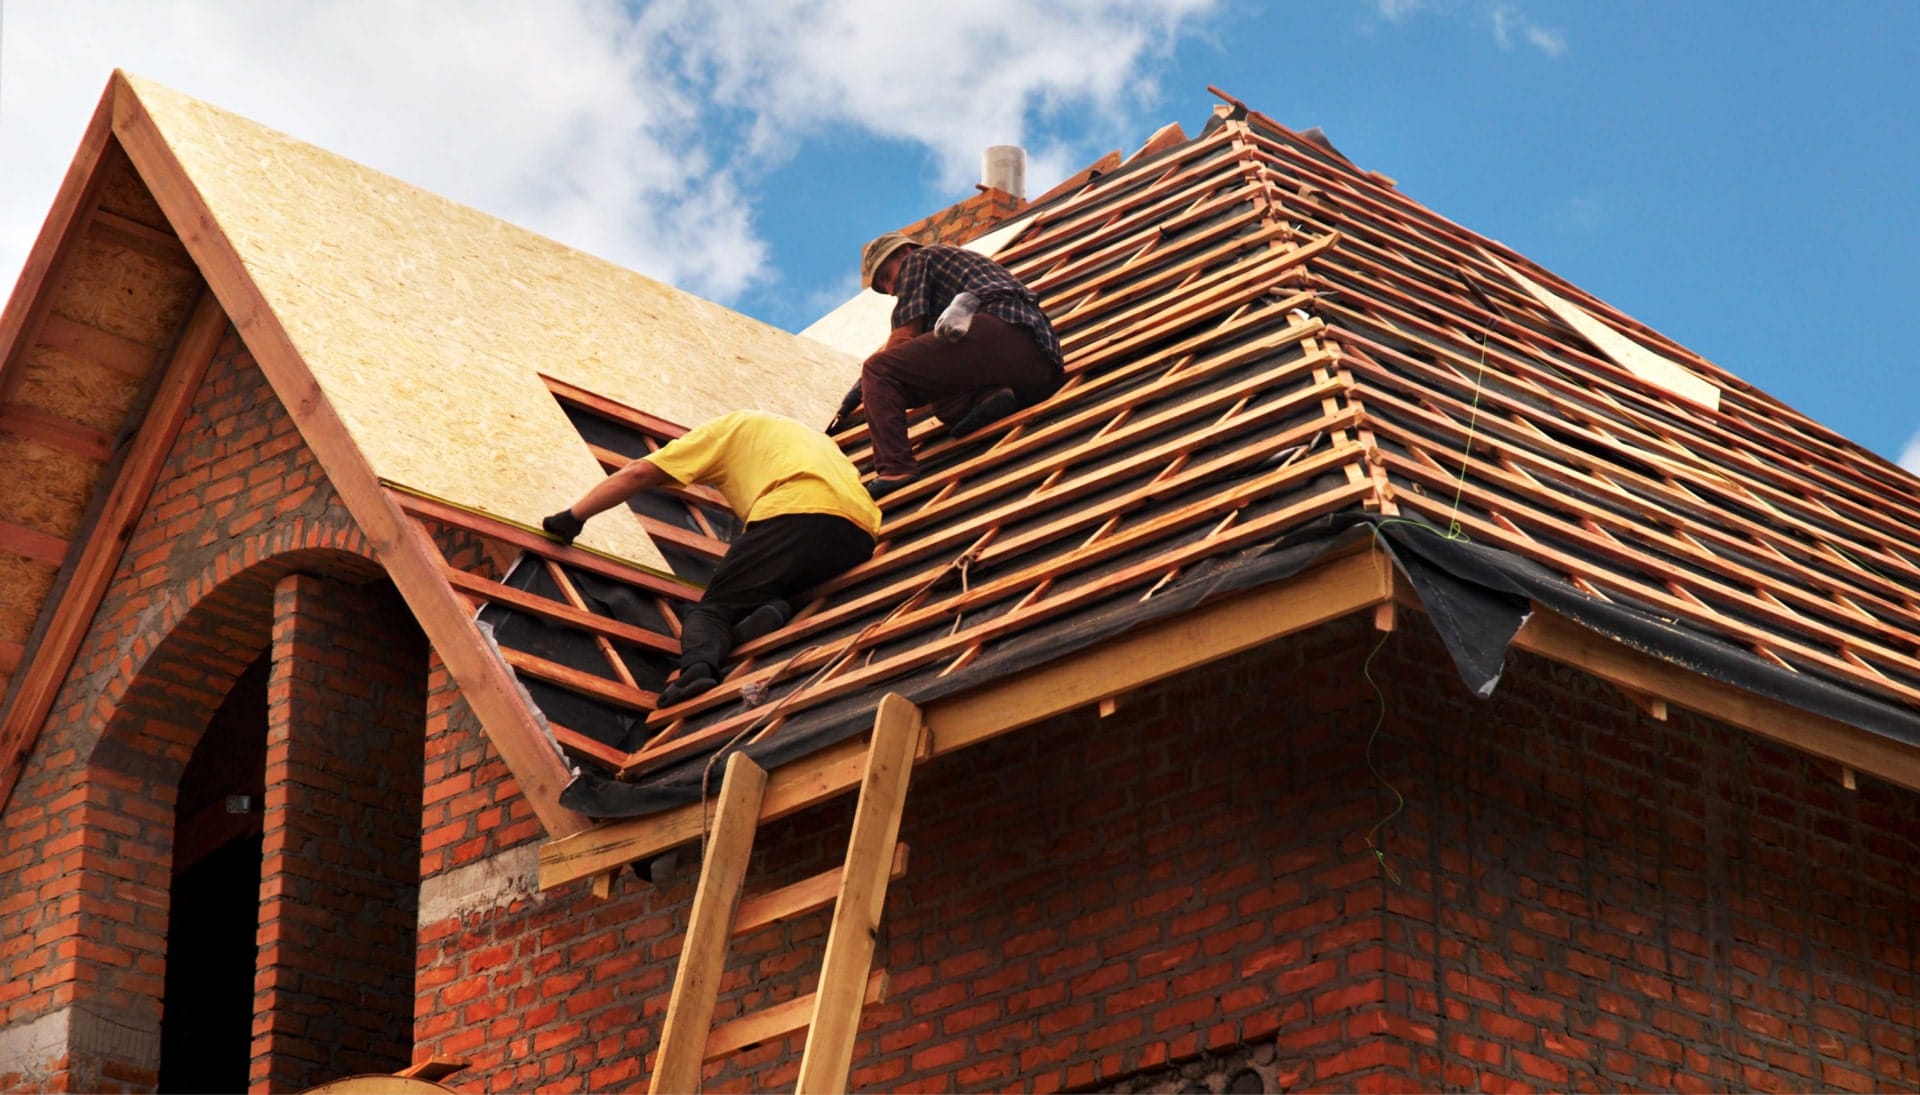 Professional roofing replacement services in Lafayette, LA that will minimize downtime for your property.